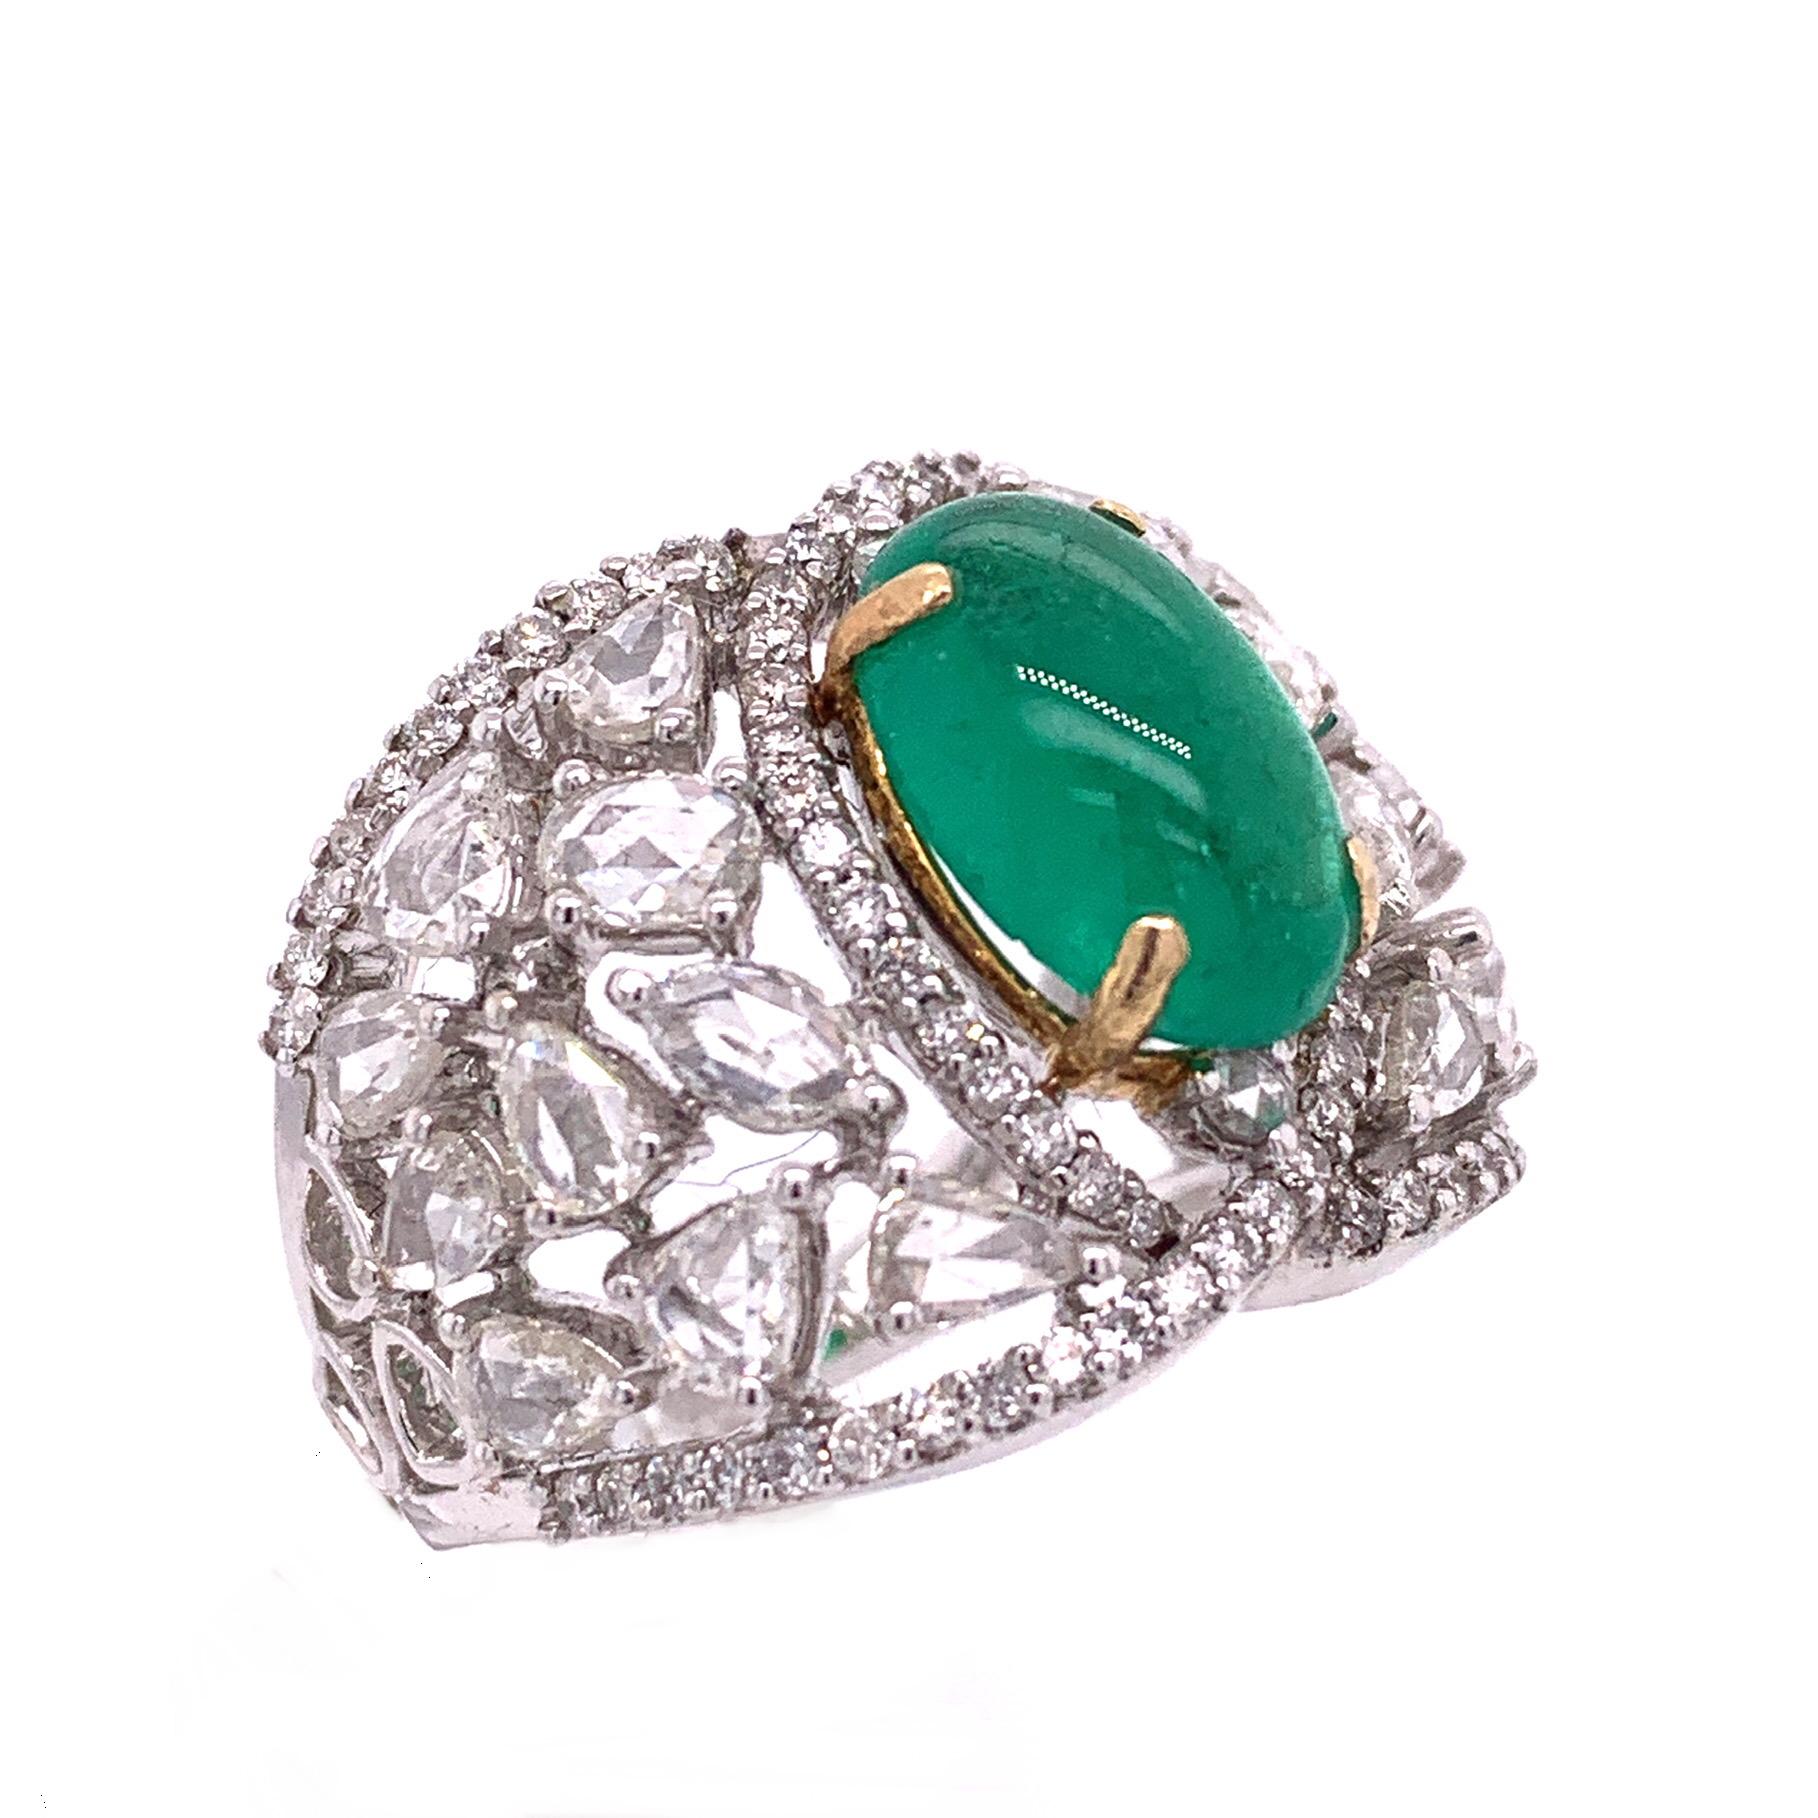 18K White & Yellow gold. 
US size 7.
Emeralds: 3.22 ct total weight.
Rose Cut Diamonds: 2.07ct total weight.
Diamonds: 0.75ct total weight.
All diamonds are G-H/SI stones.

